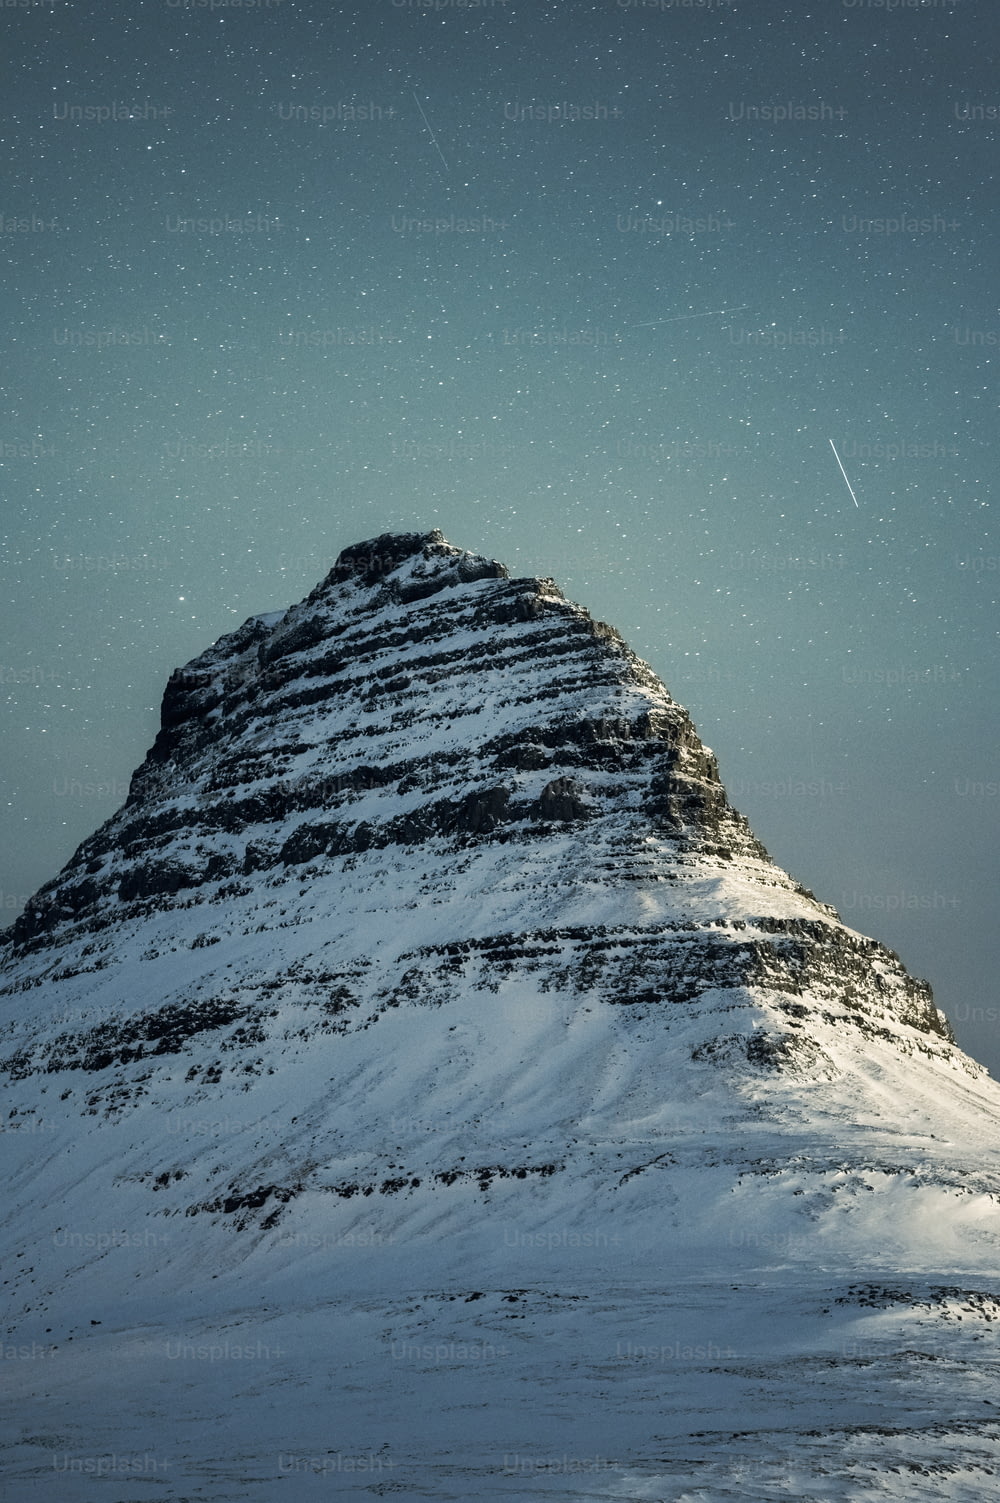 a snow covered mountain under a star filled sky